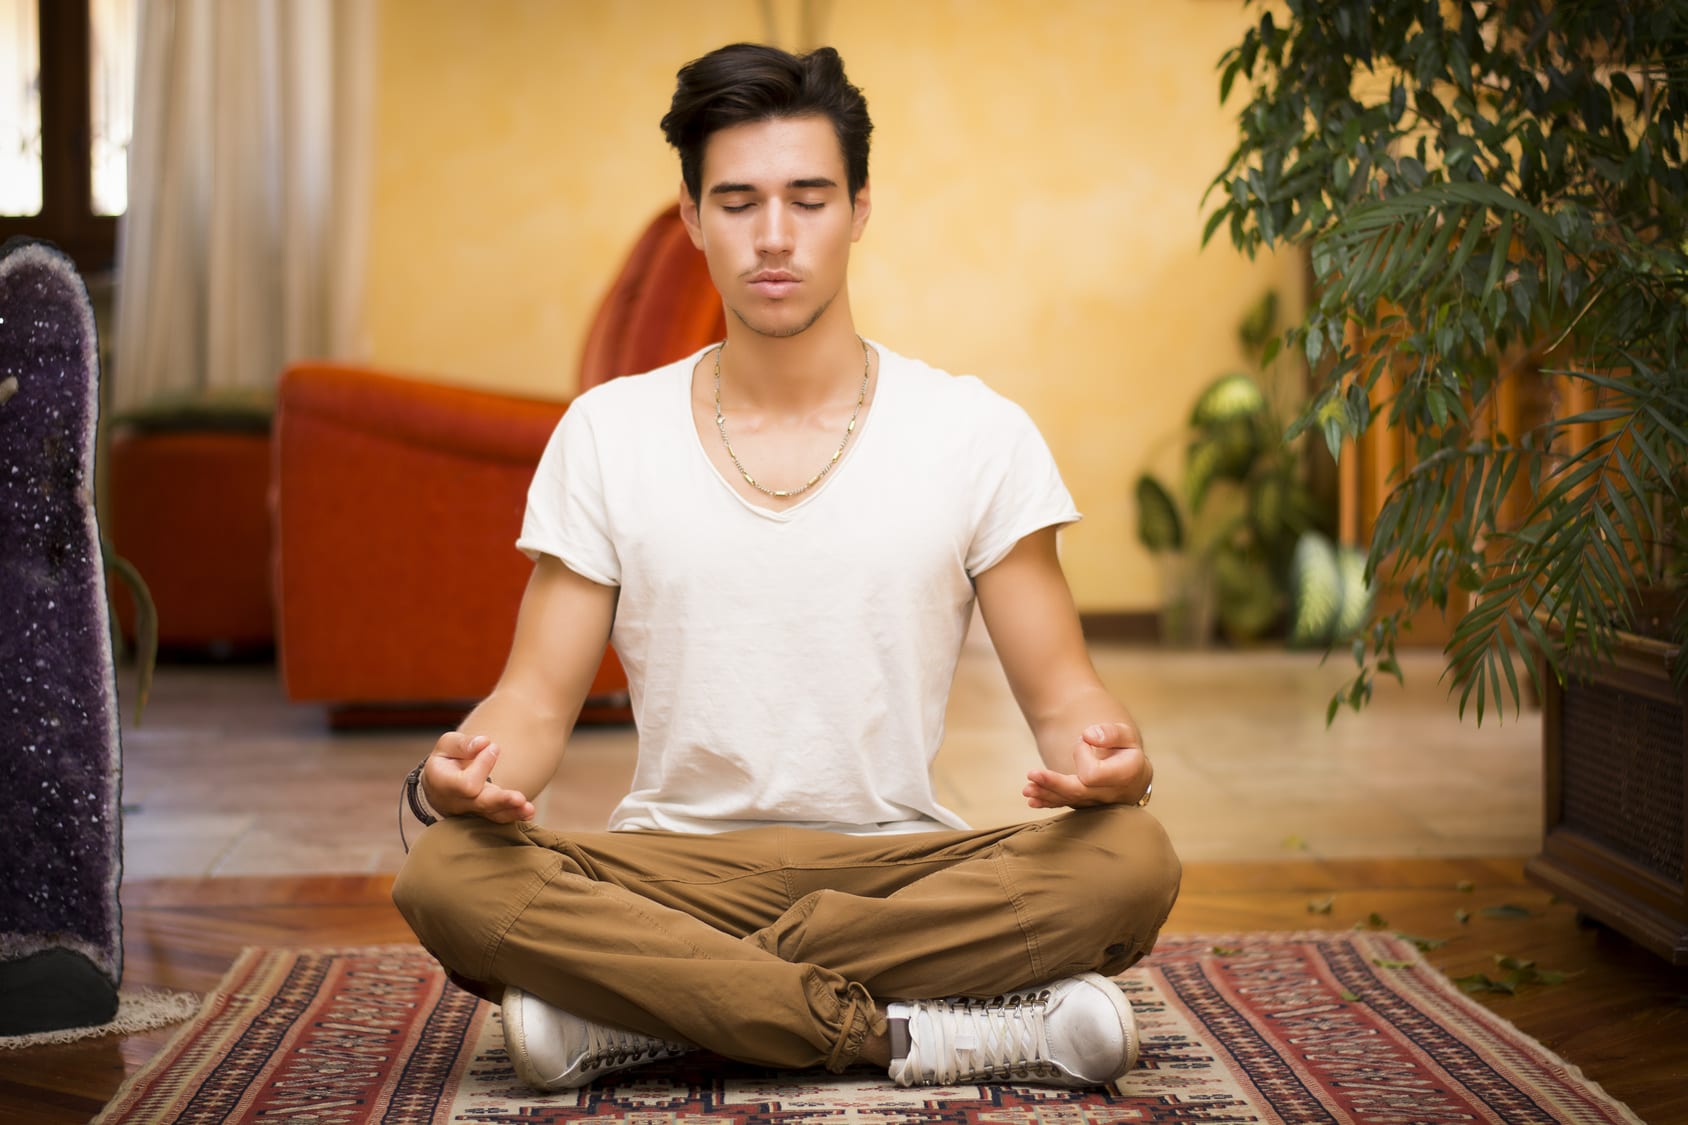 Do meditation once in a day to lower stress level